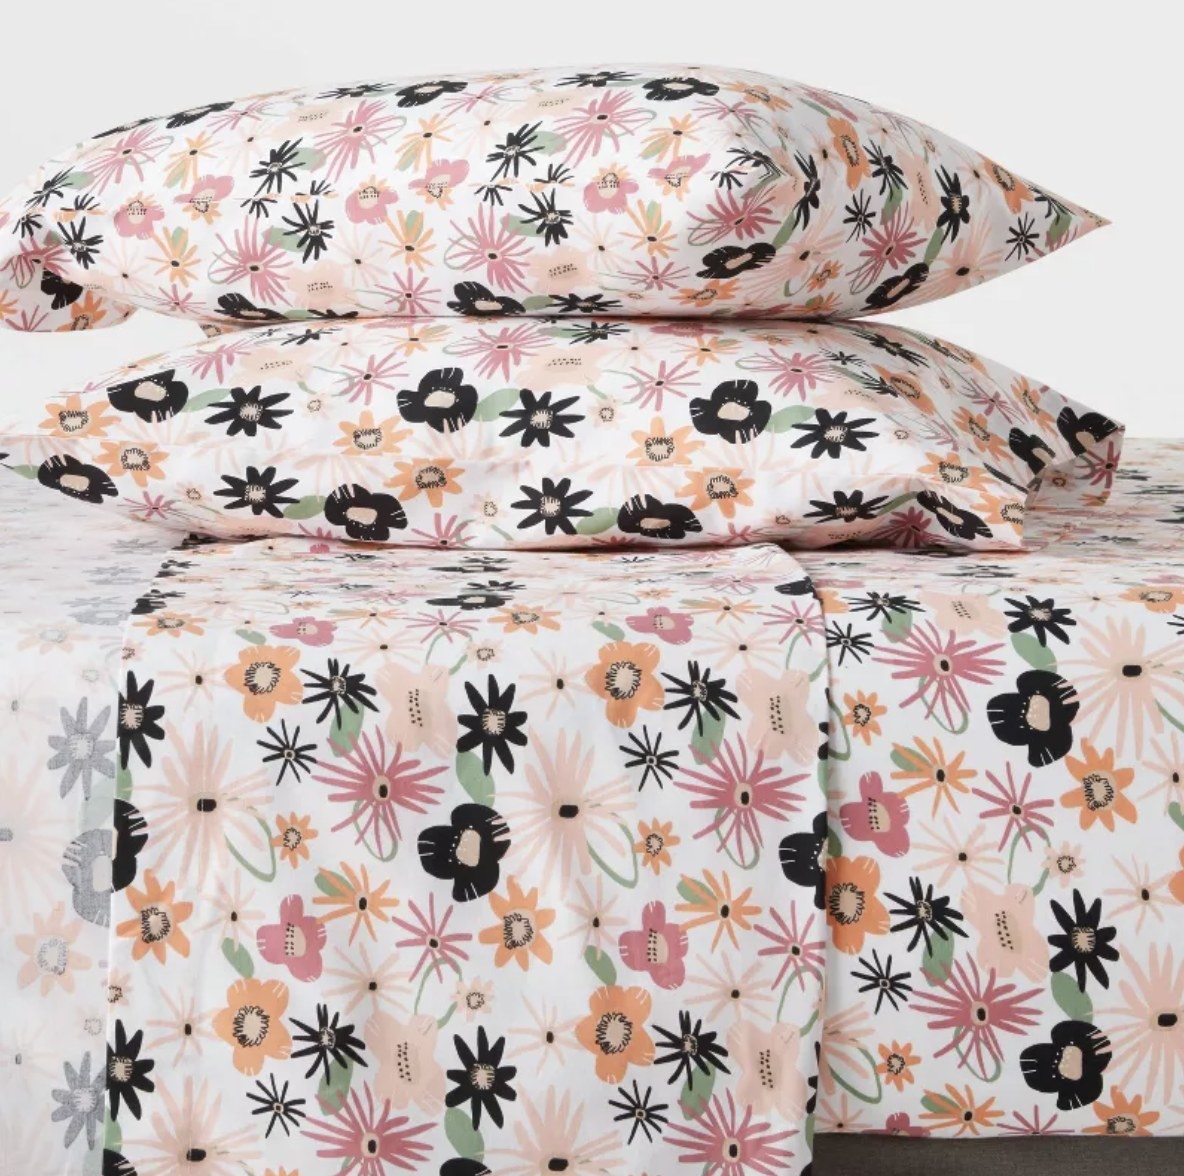 A set of floral bed sheets